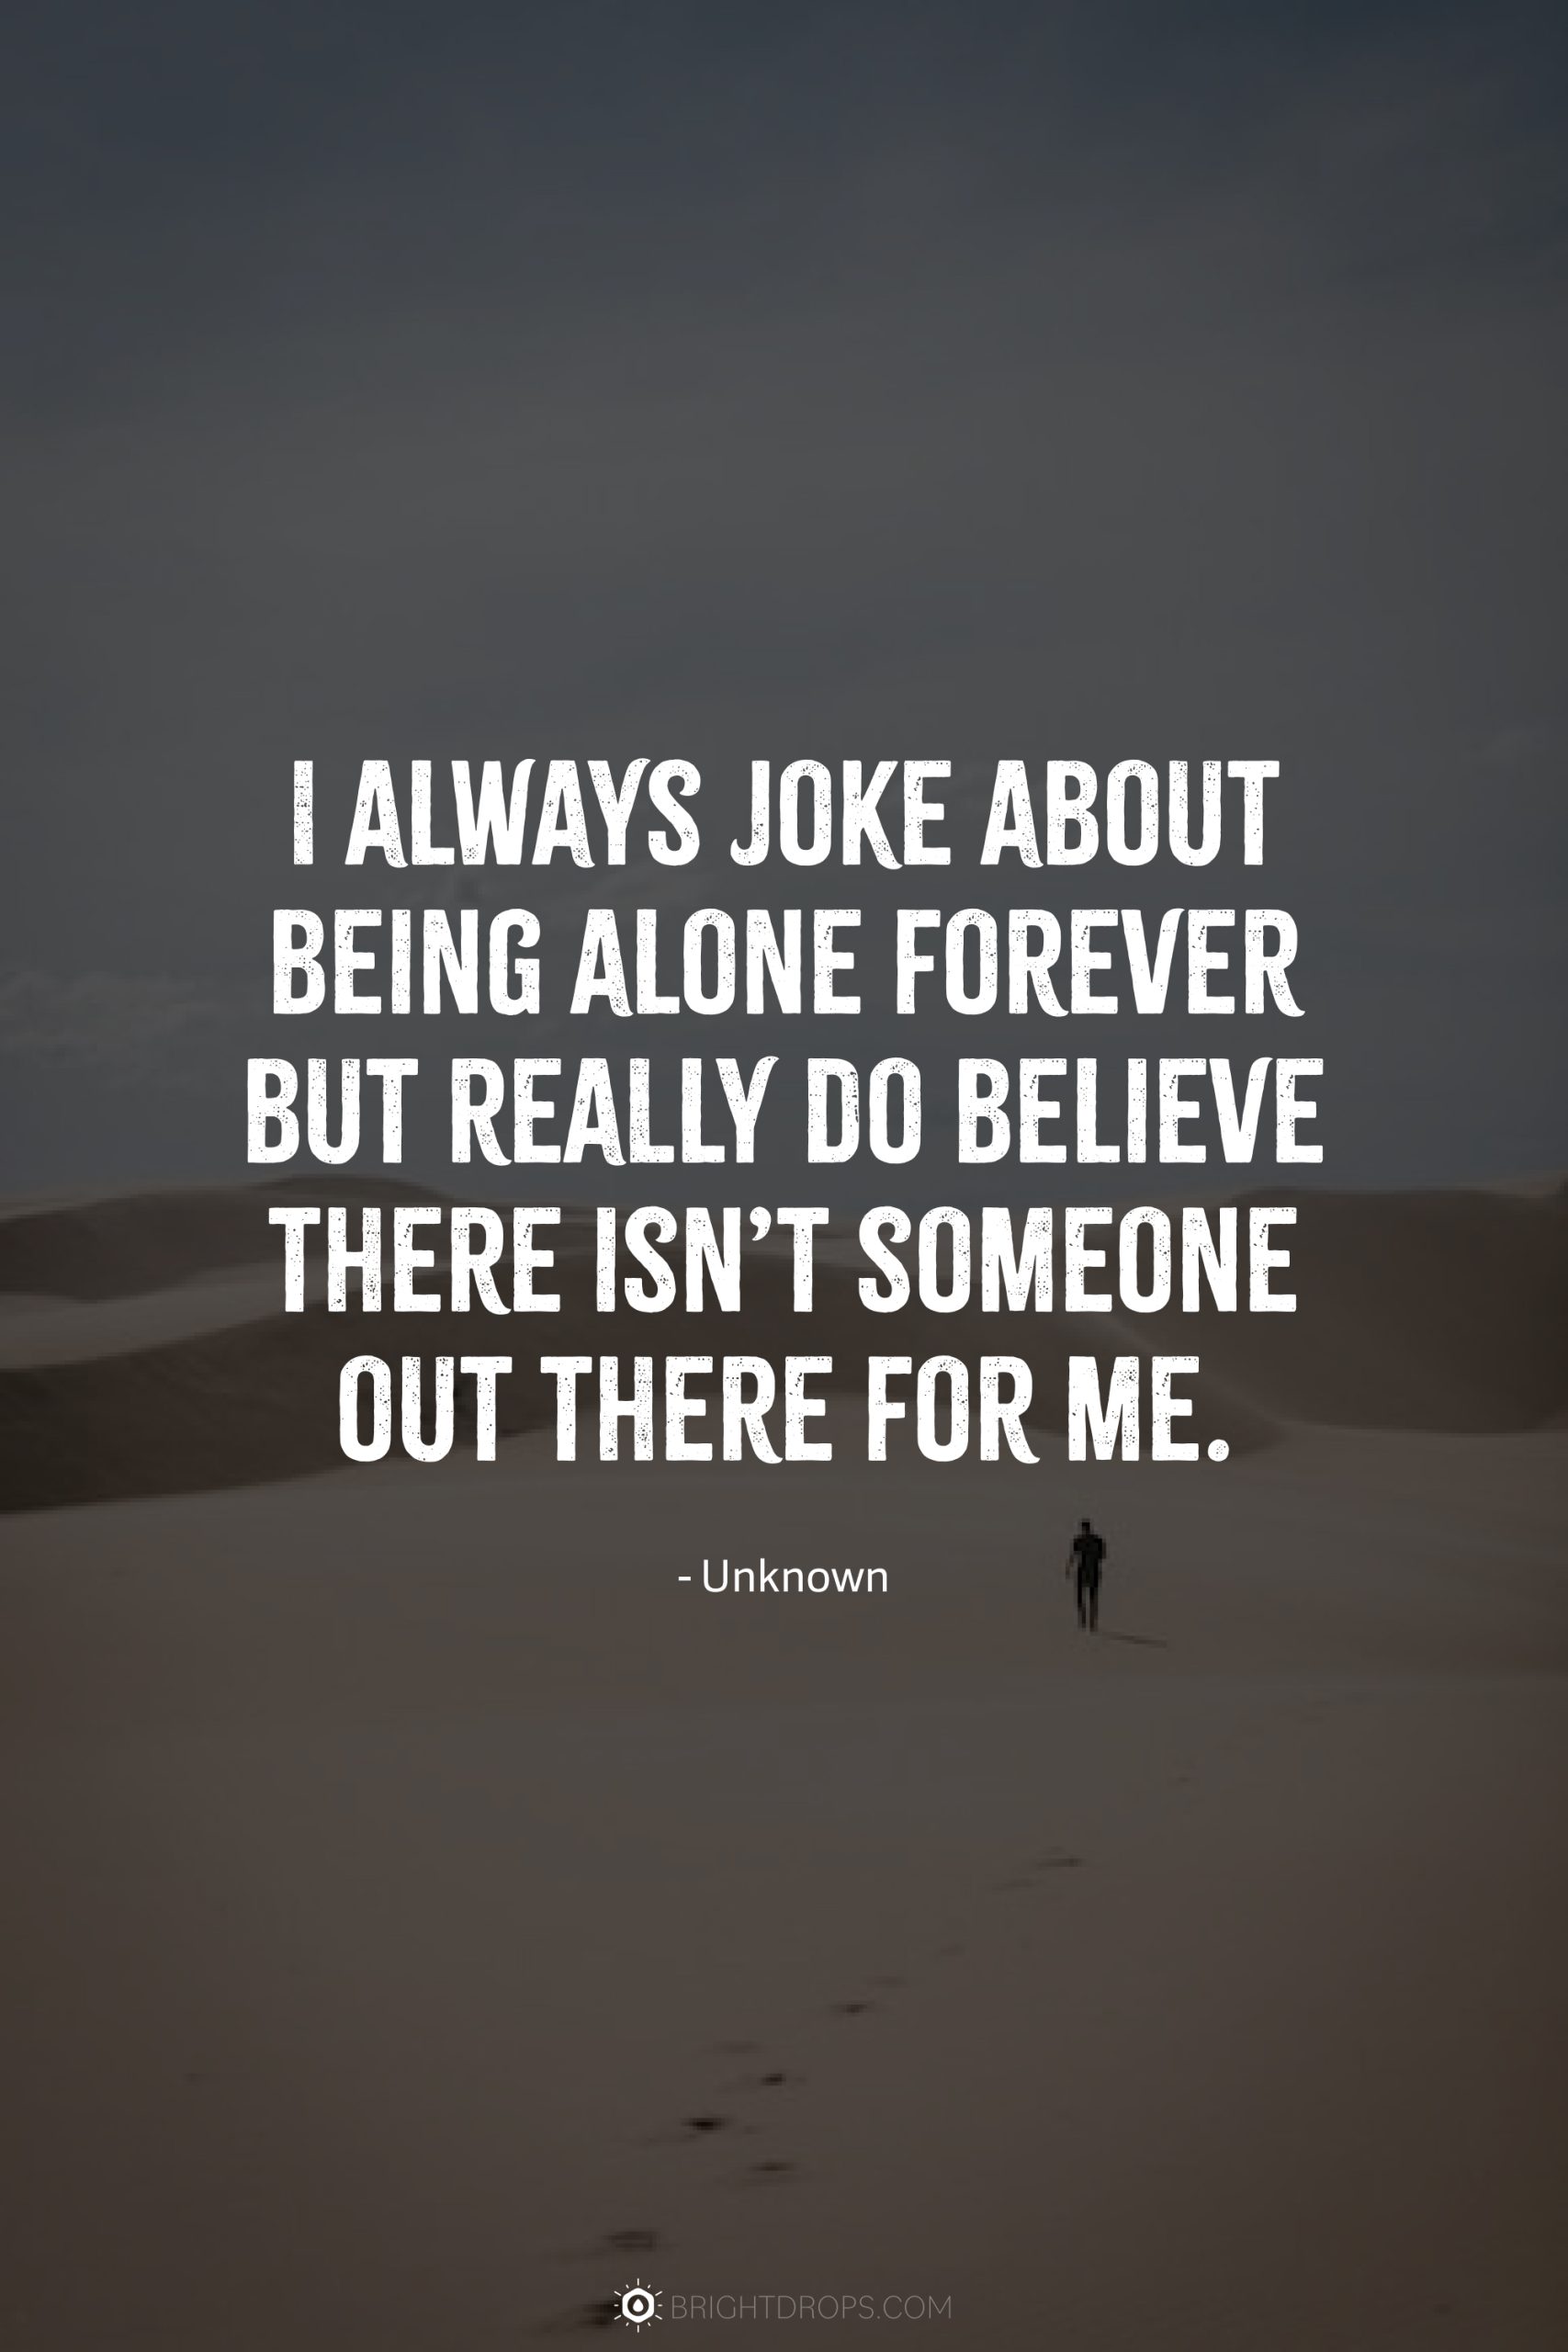 I always joke about being alone forever but really do believe there isn’t someone out there for me.